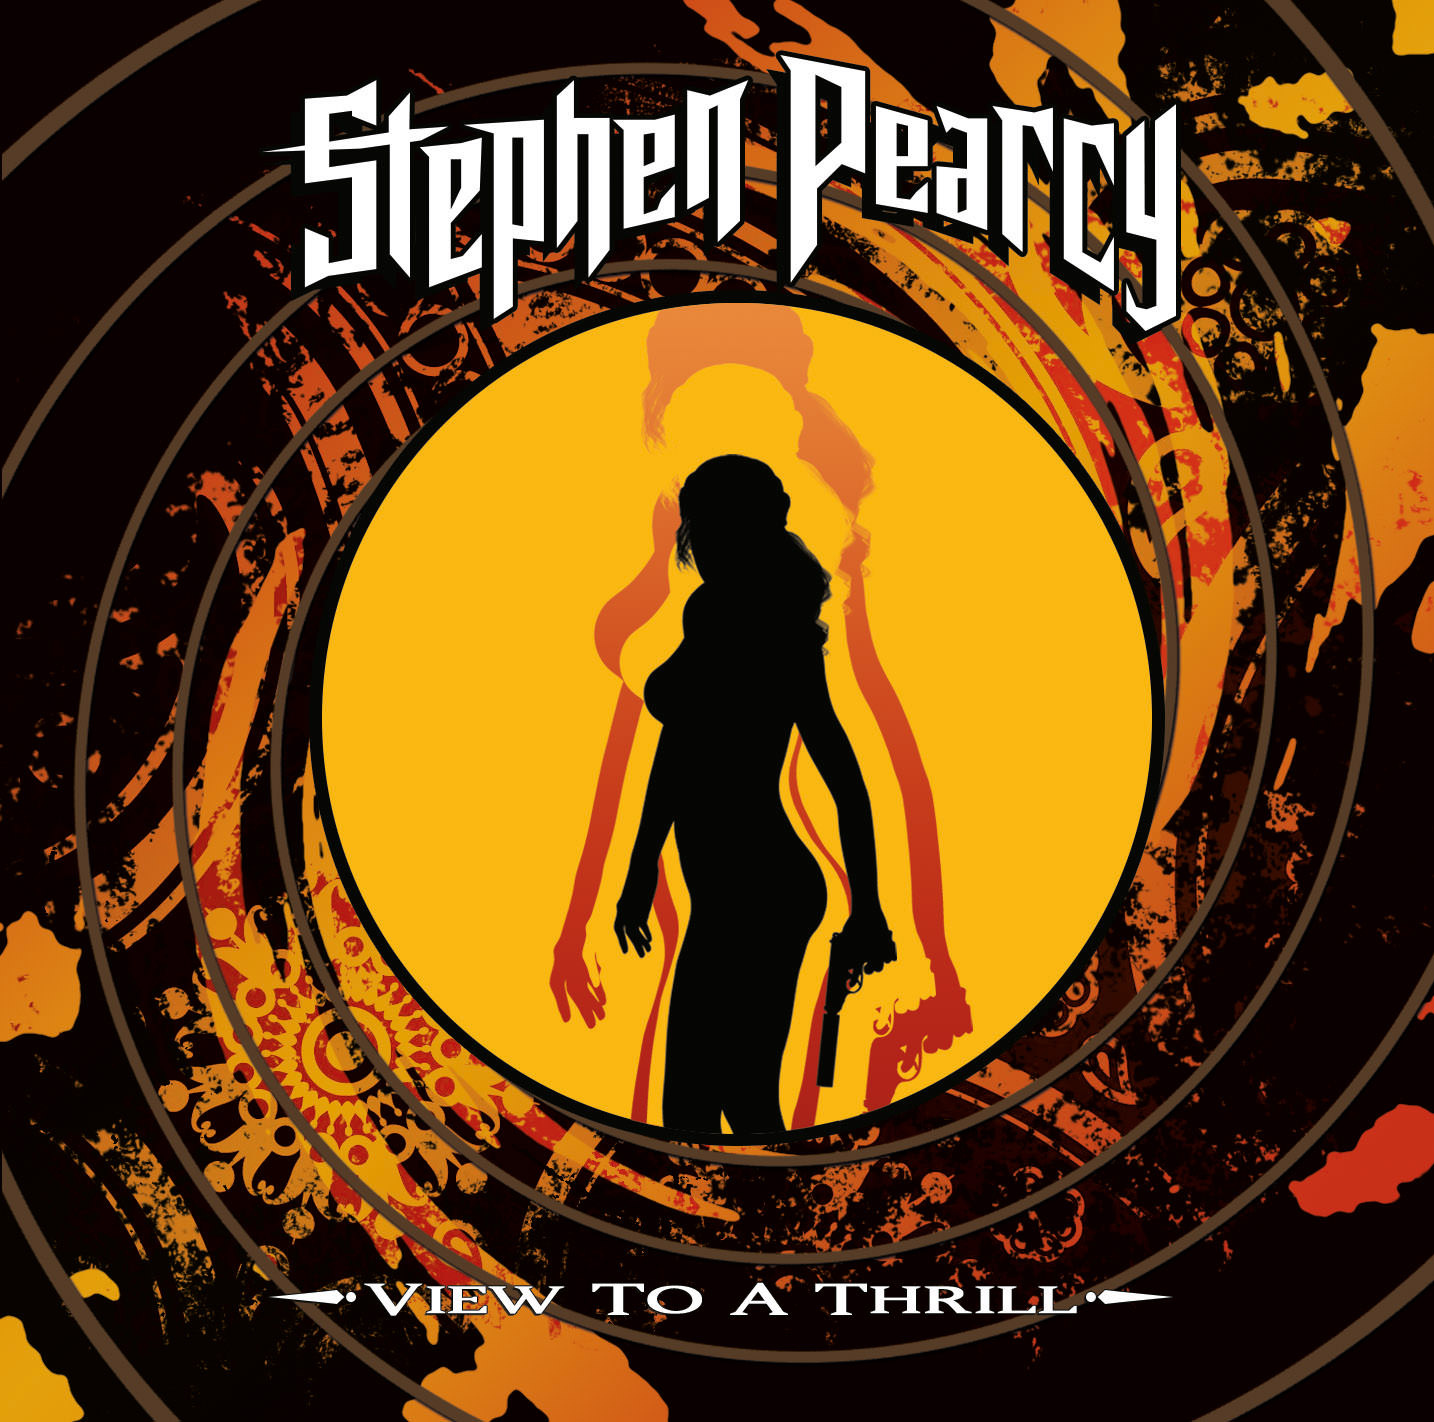 Stephen Pearcy Set to Release New Solo Album "View to a Thrill" November 9th